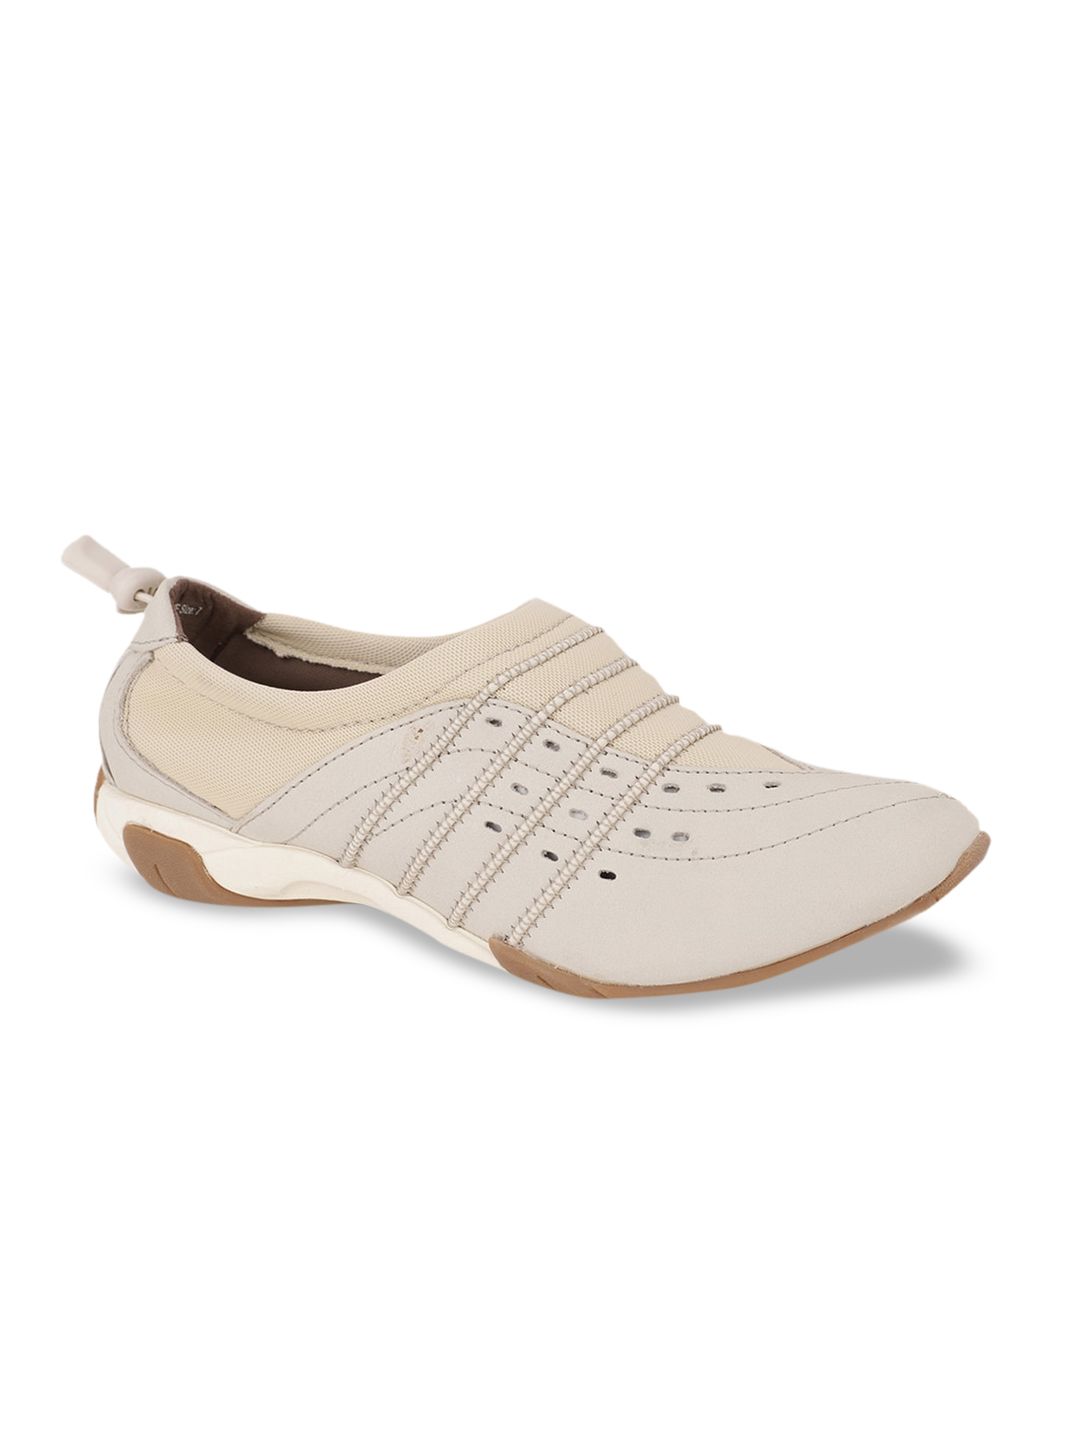 Hush Puppies Women Off White Woven Design Leather Sneakers Price in India